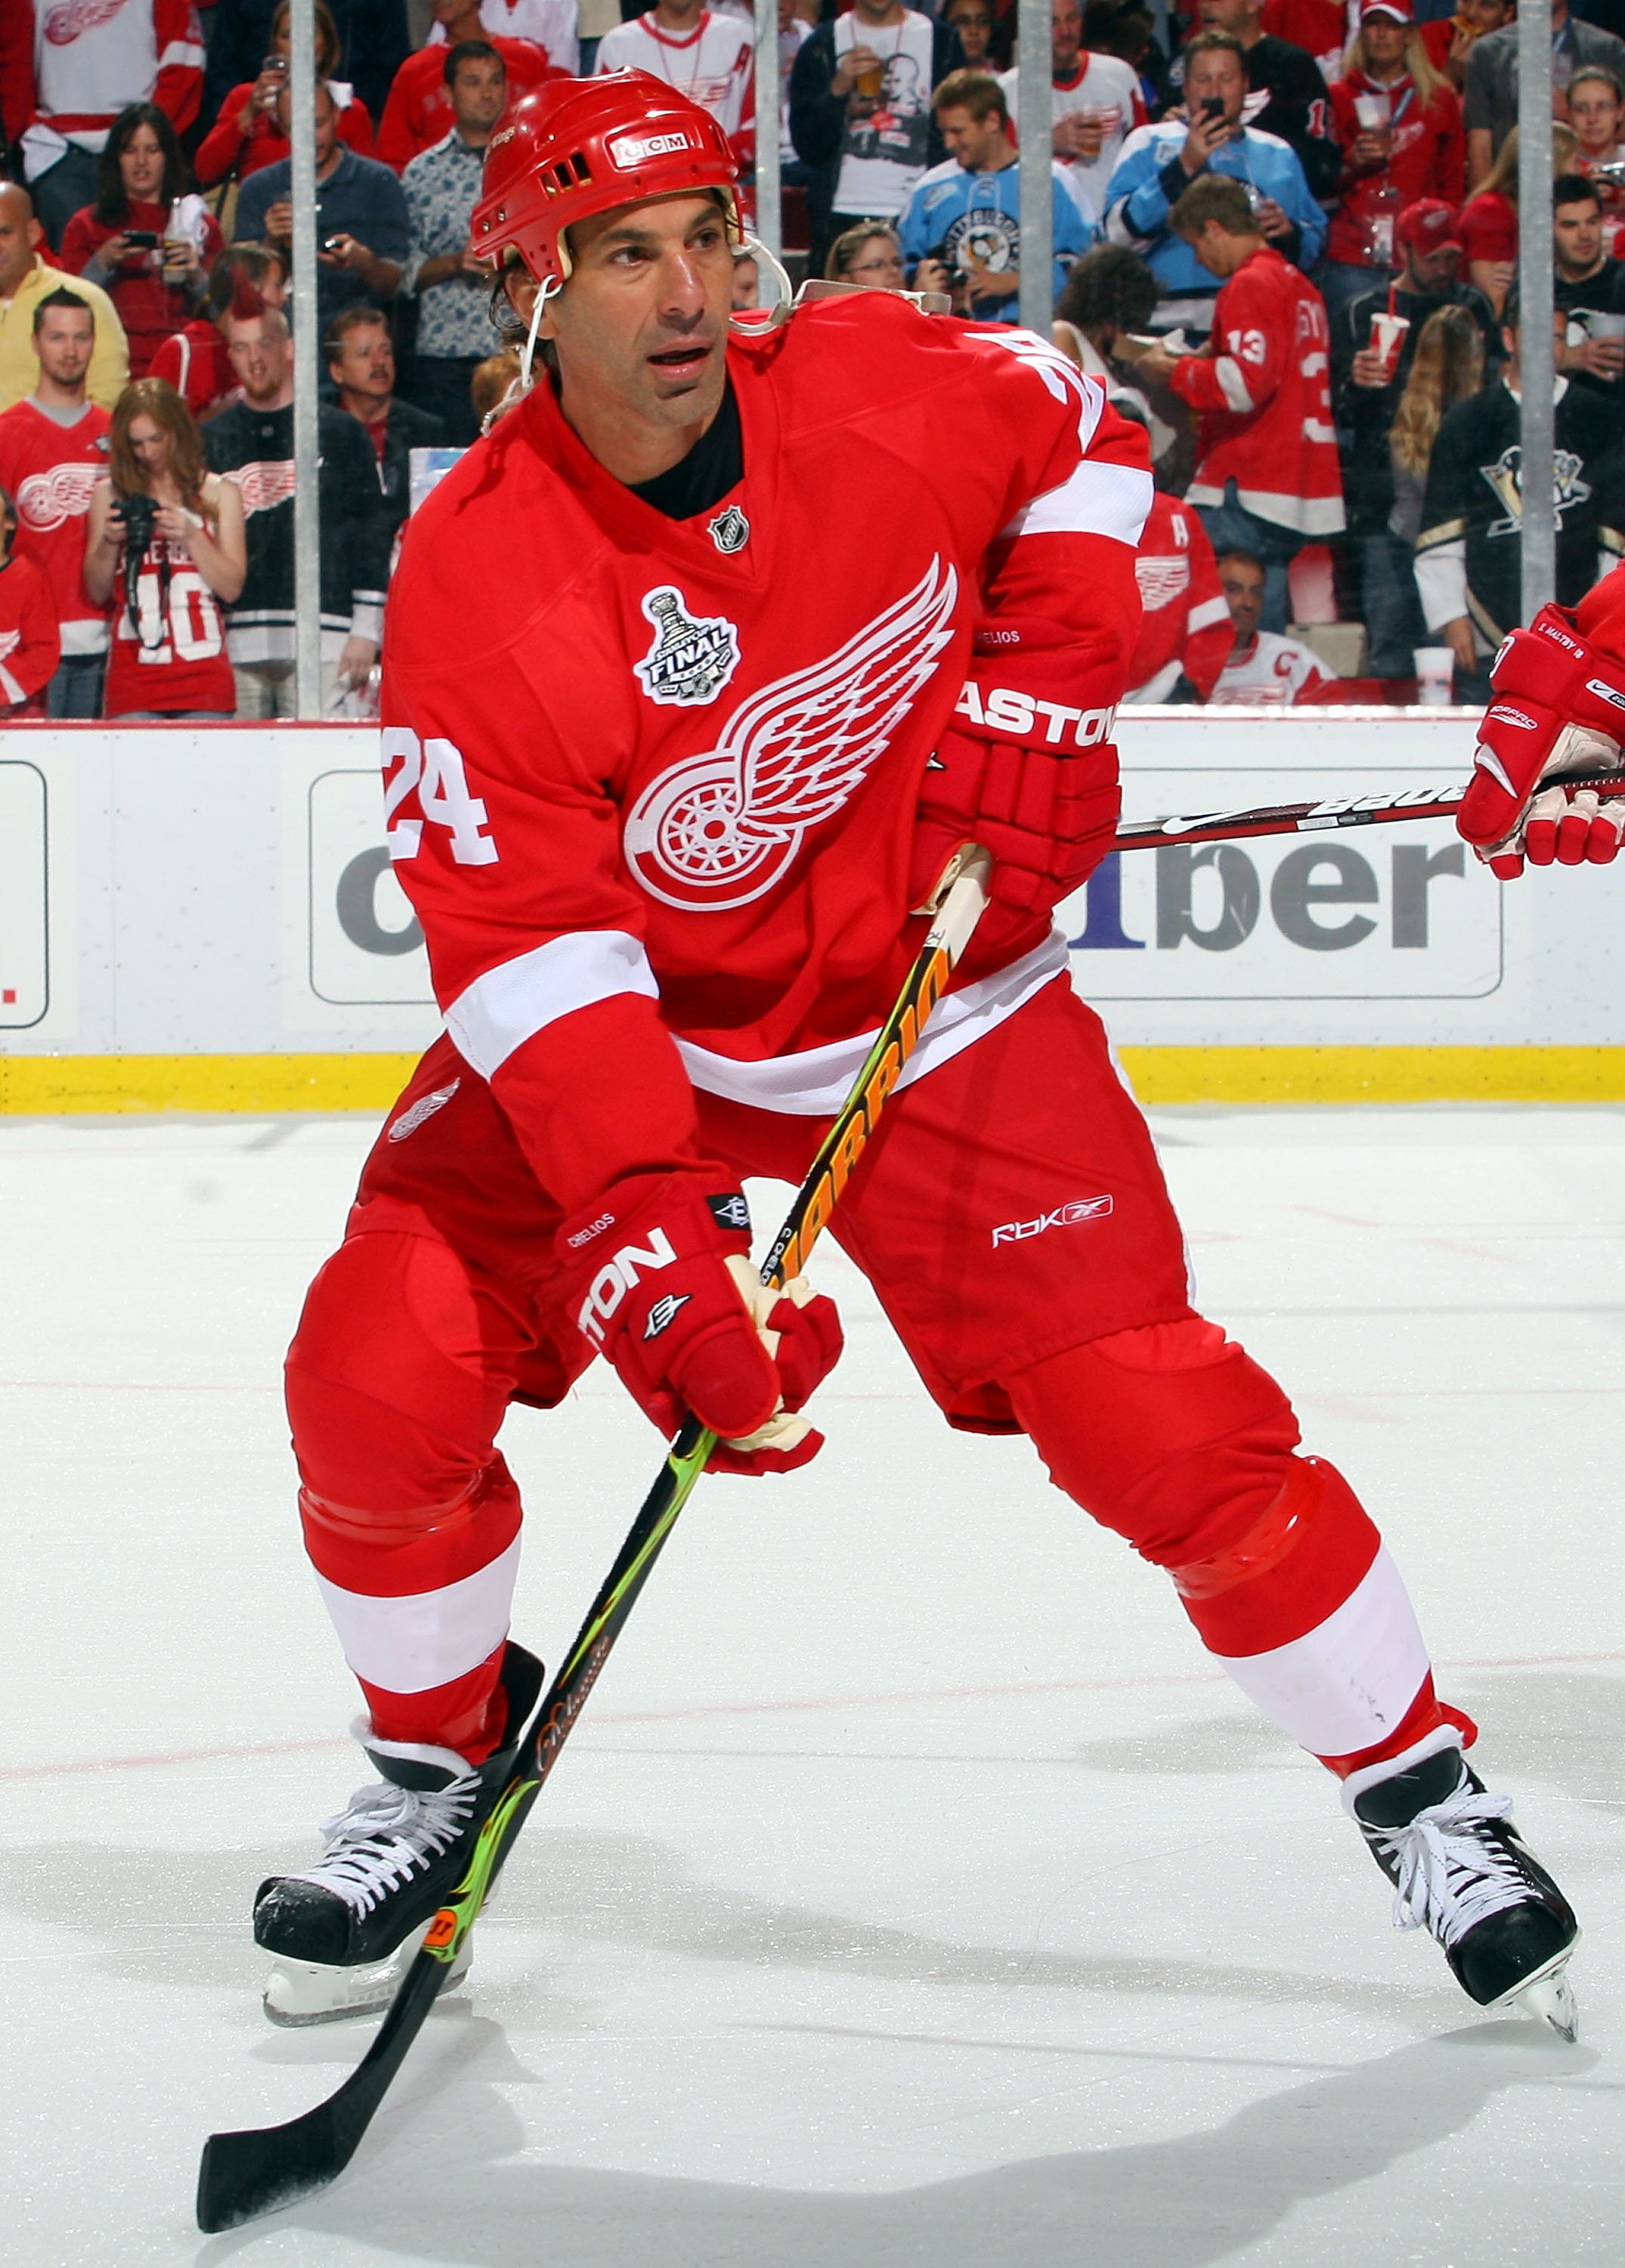 DETROIT - MAY 30:  Chris Chelios #24 of the Detroit Red Wings warms up prior to Game 1 of the 2009 Stanley Cup Finals against the Pittsburgh Penguins at Joe Louis Arena on May 30, 2009 in Detroit, Michigan.  (Photo by Jim McIsaac/Getty Images)